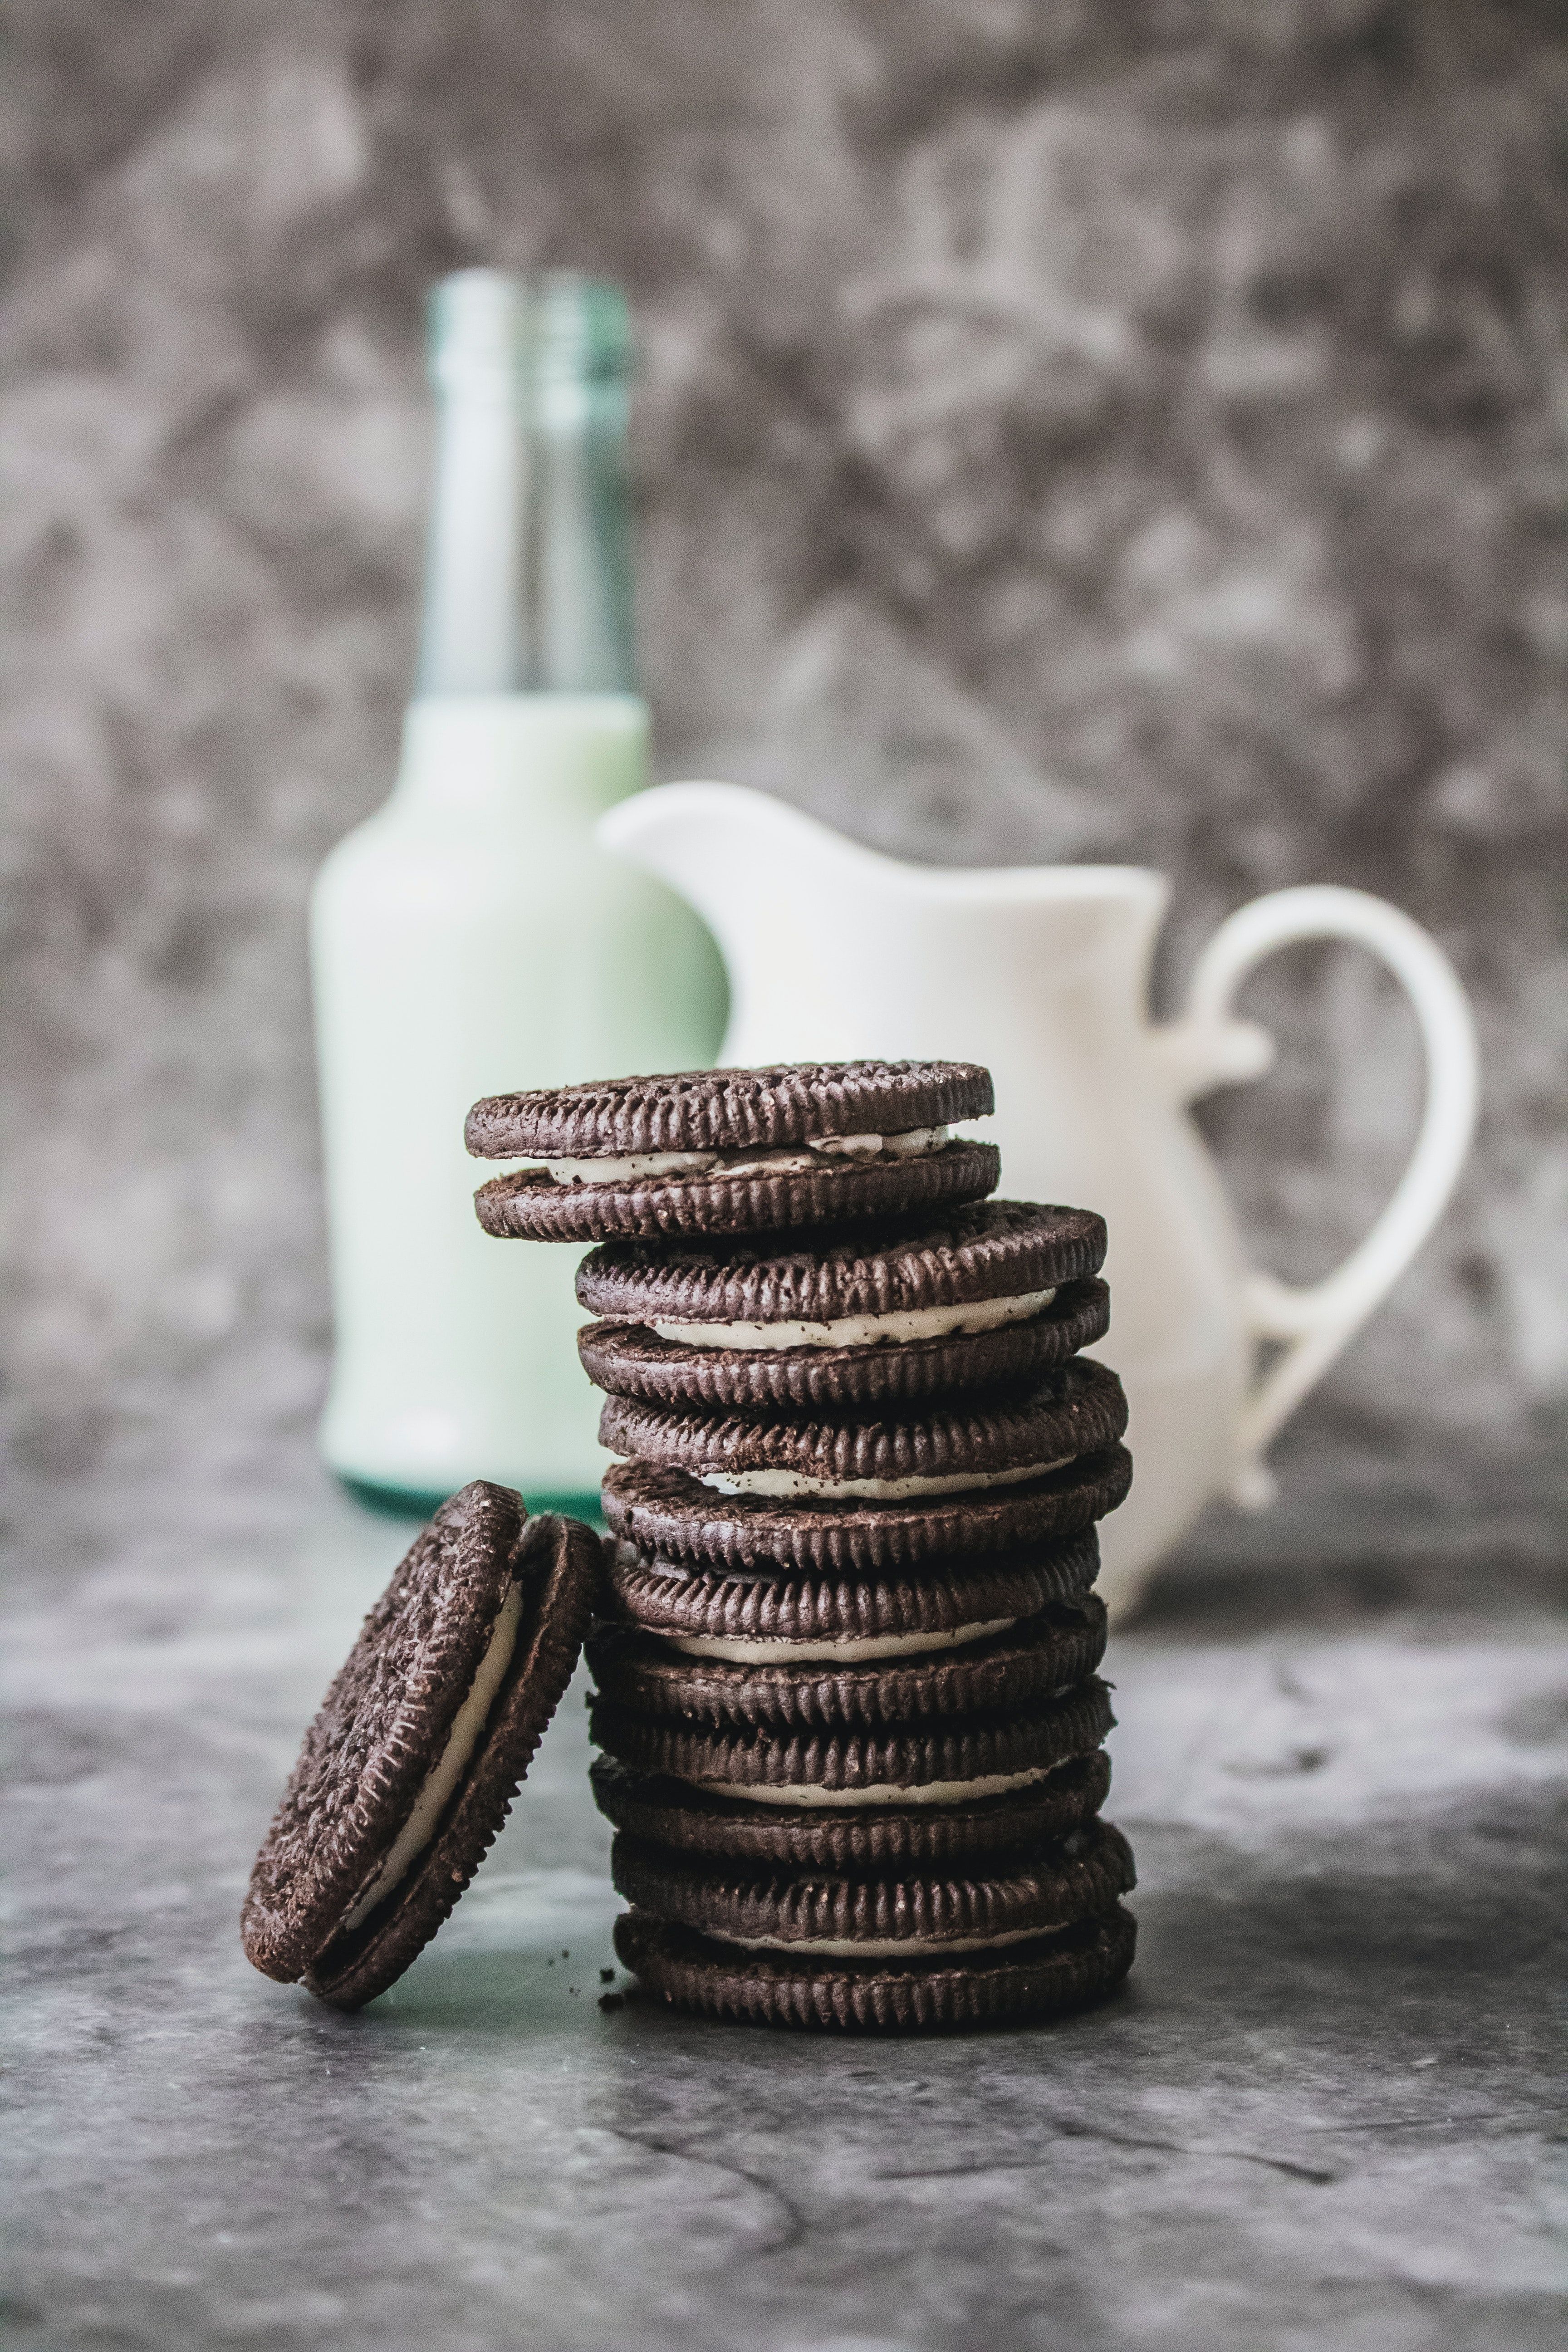 A stack of chocolate sandwich cookies with a bottle of milk in the background. - Oreo